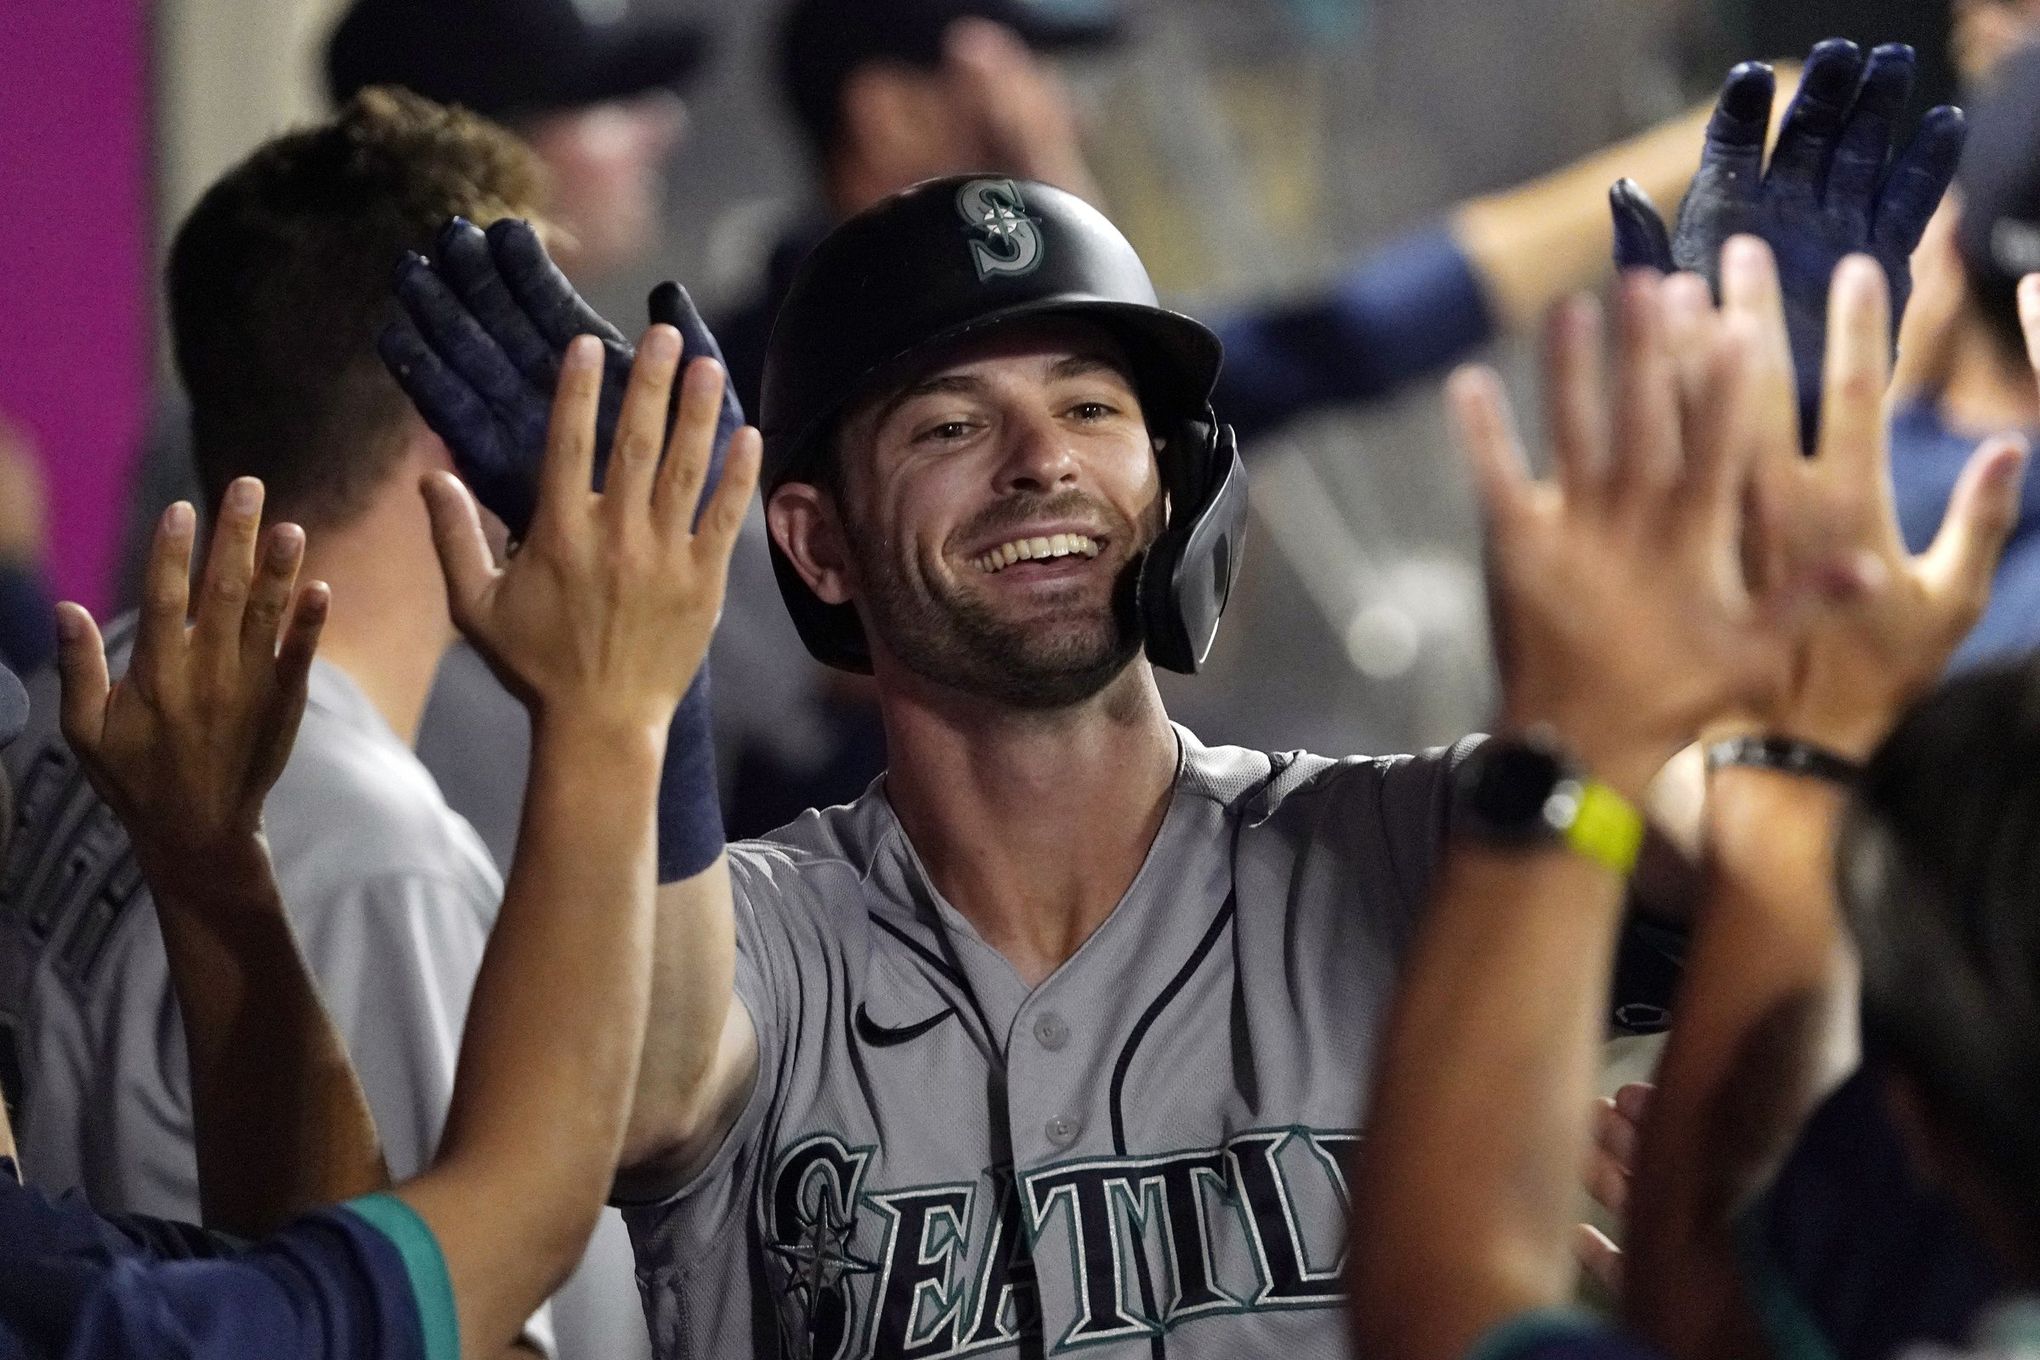 Seattle Mariners outfielder Mitch Haniger and his wife had a really great  week